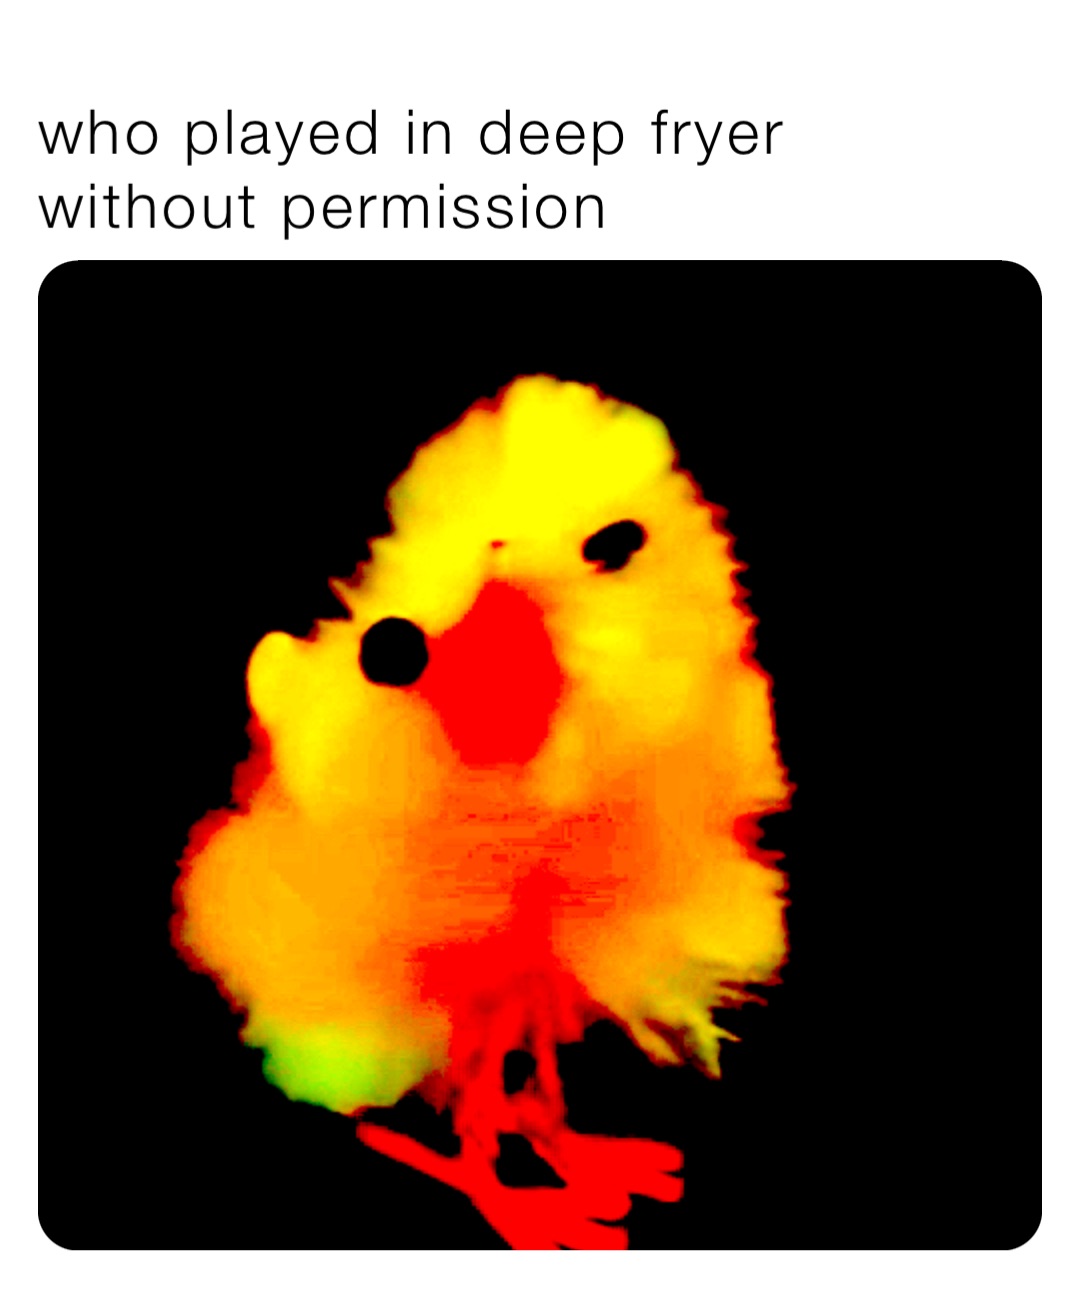 who played in deep fryer without permission